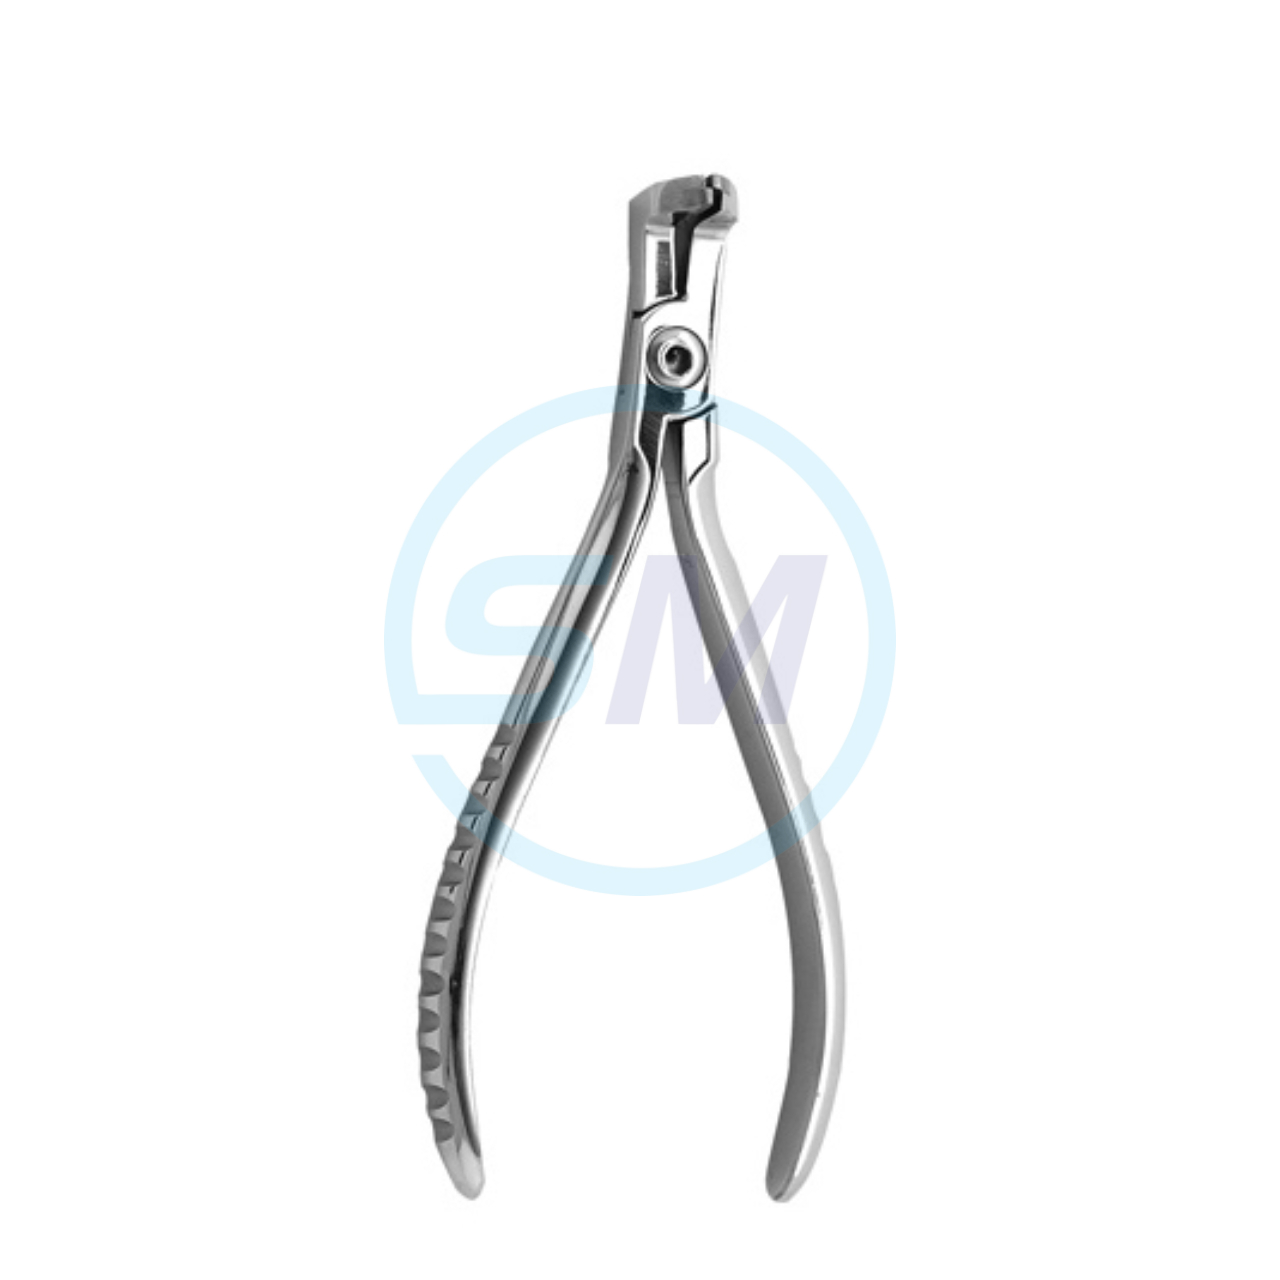 Distal End Cutter 16S Small Elite